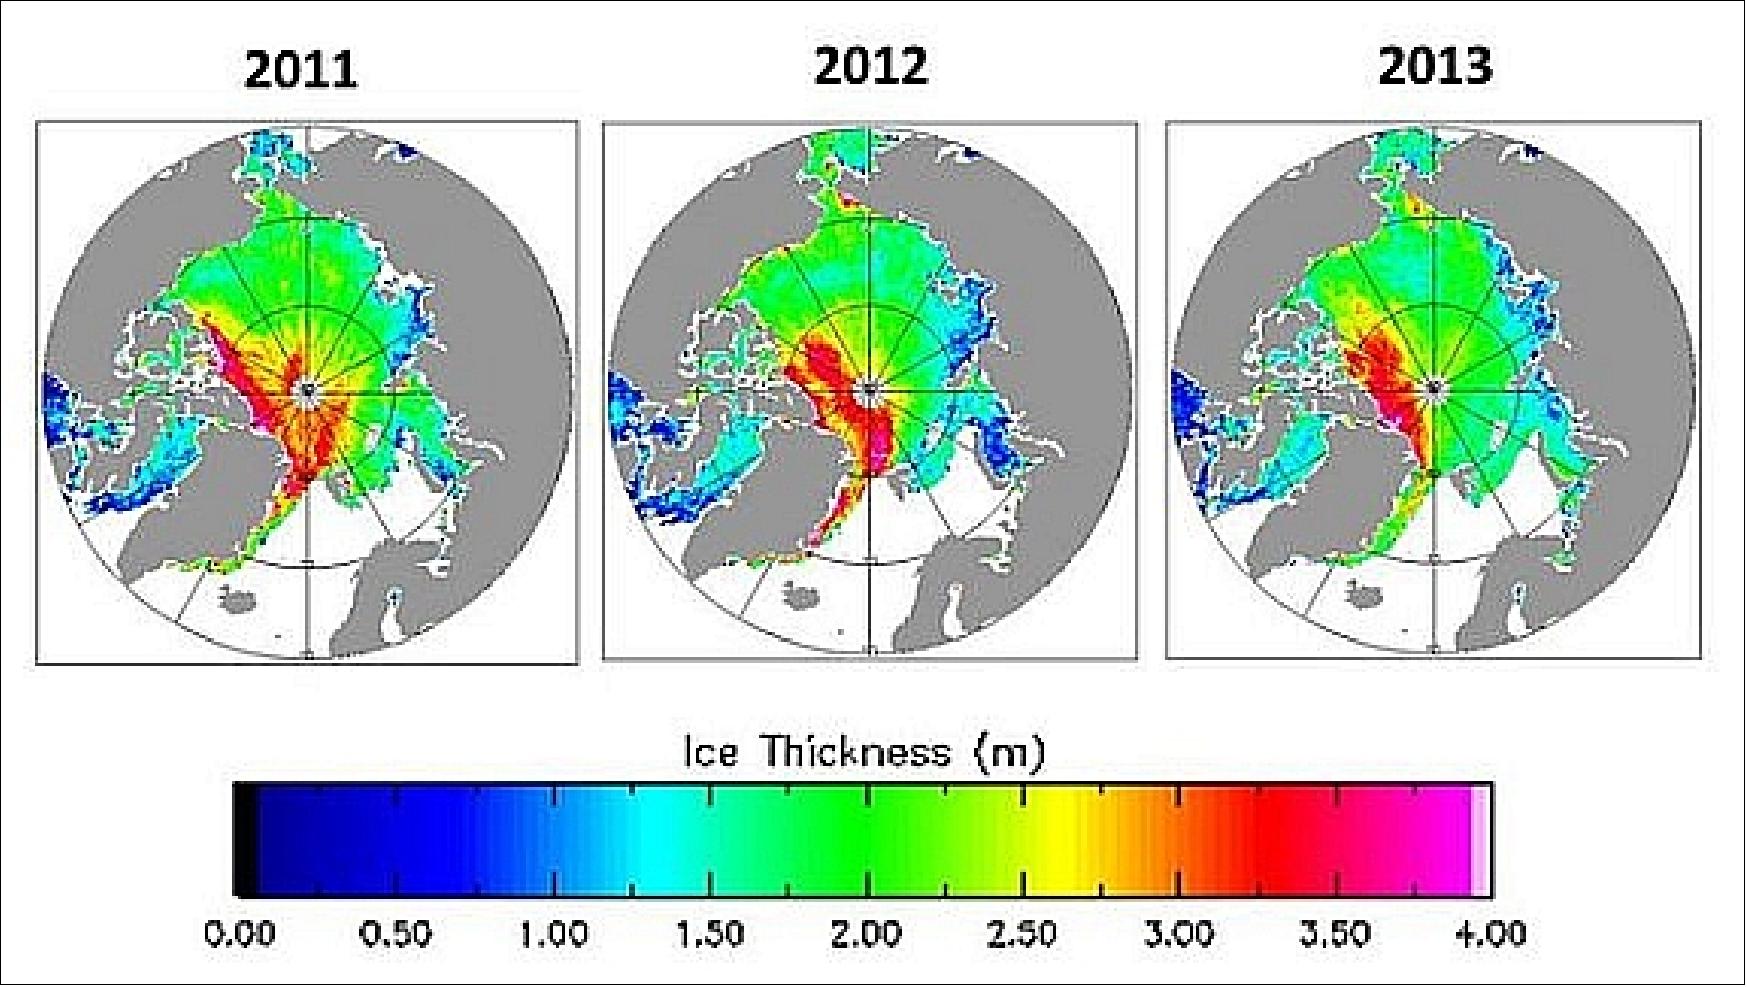 Figure 85: Variations in spring ice thickness: Changes in ice thickness for March/April 2011, 2012 and 2013 as measured by CryoSat-2 (image credit: A. Ridout,UCL)